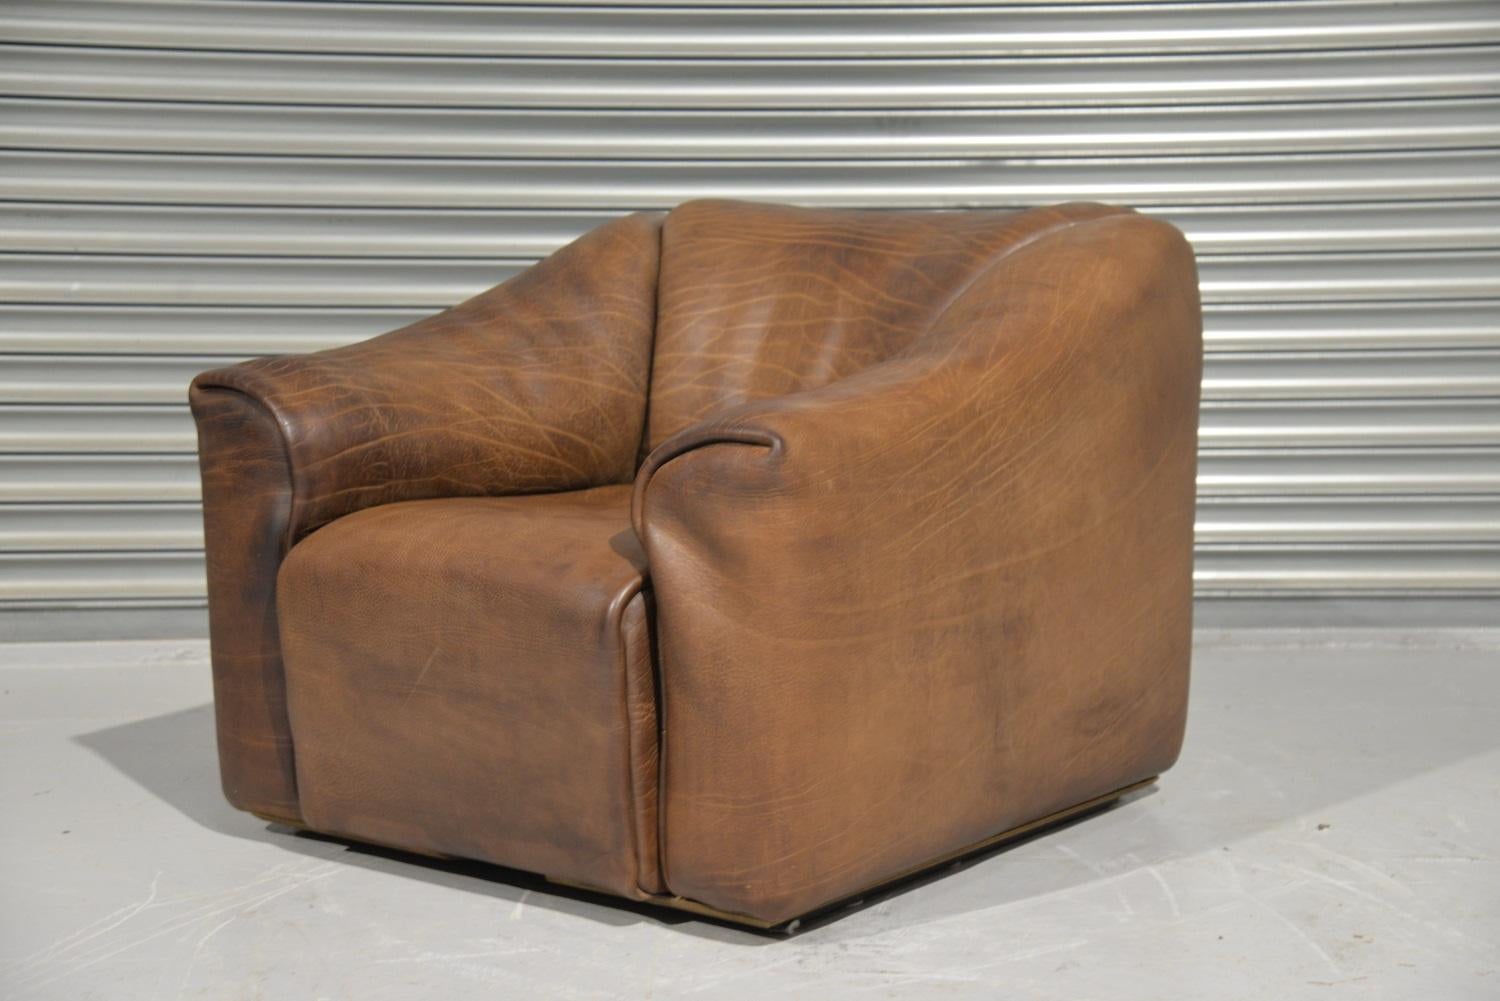 Discounted airfreight for our US Continent customers (from 2 weeks door to door)

We are delighted to bring to you an ultra rare vintage De Sede DS 47 armchair. Hand built in the 1970s by De Sede craftsman in Switzerland, this piece is upholstered